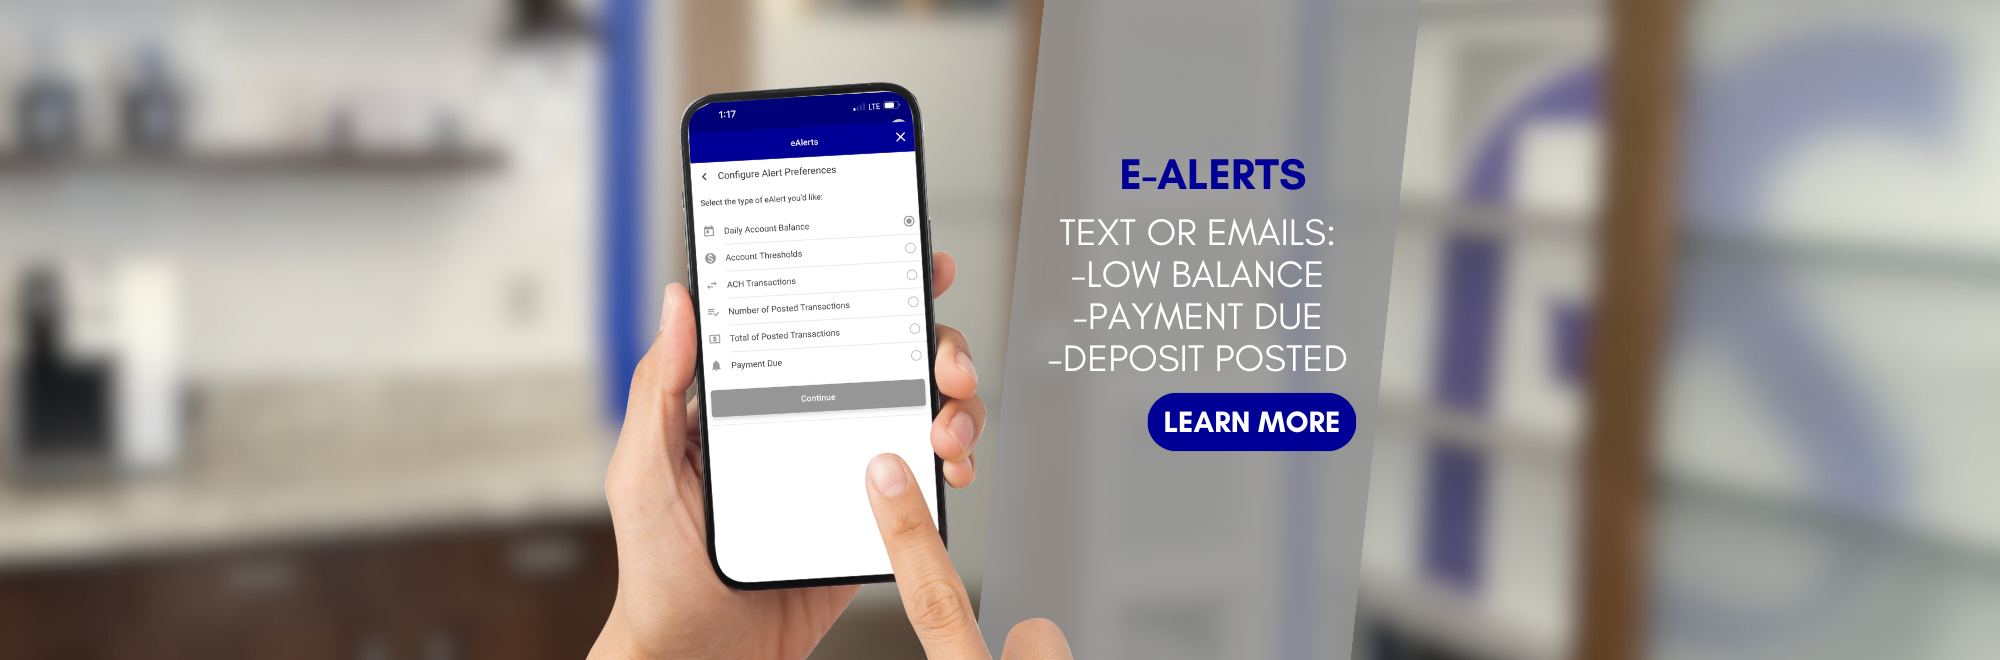 E-Alerts Text or Emails -Low Balances -Payment Due -Deposit Posted Click to learn more